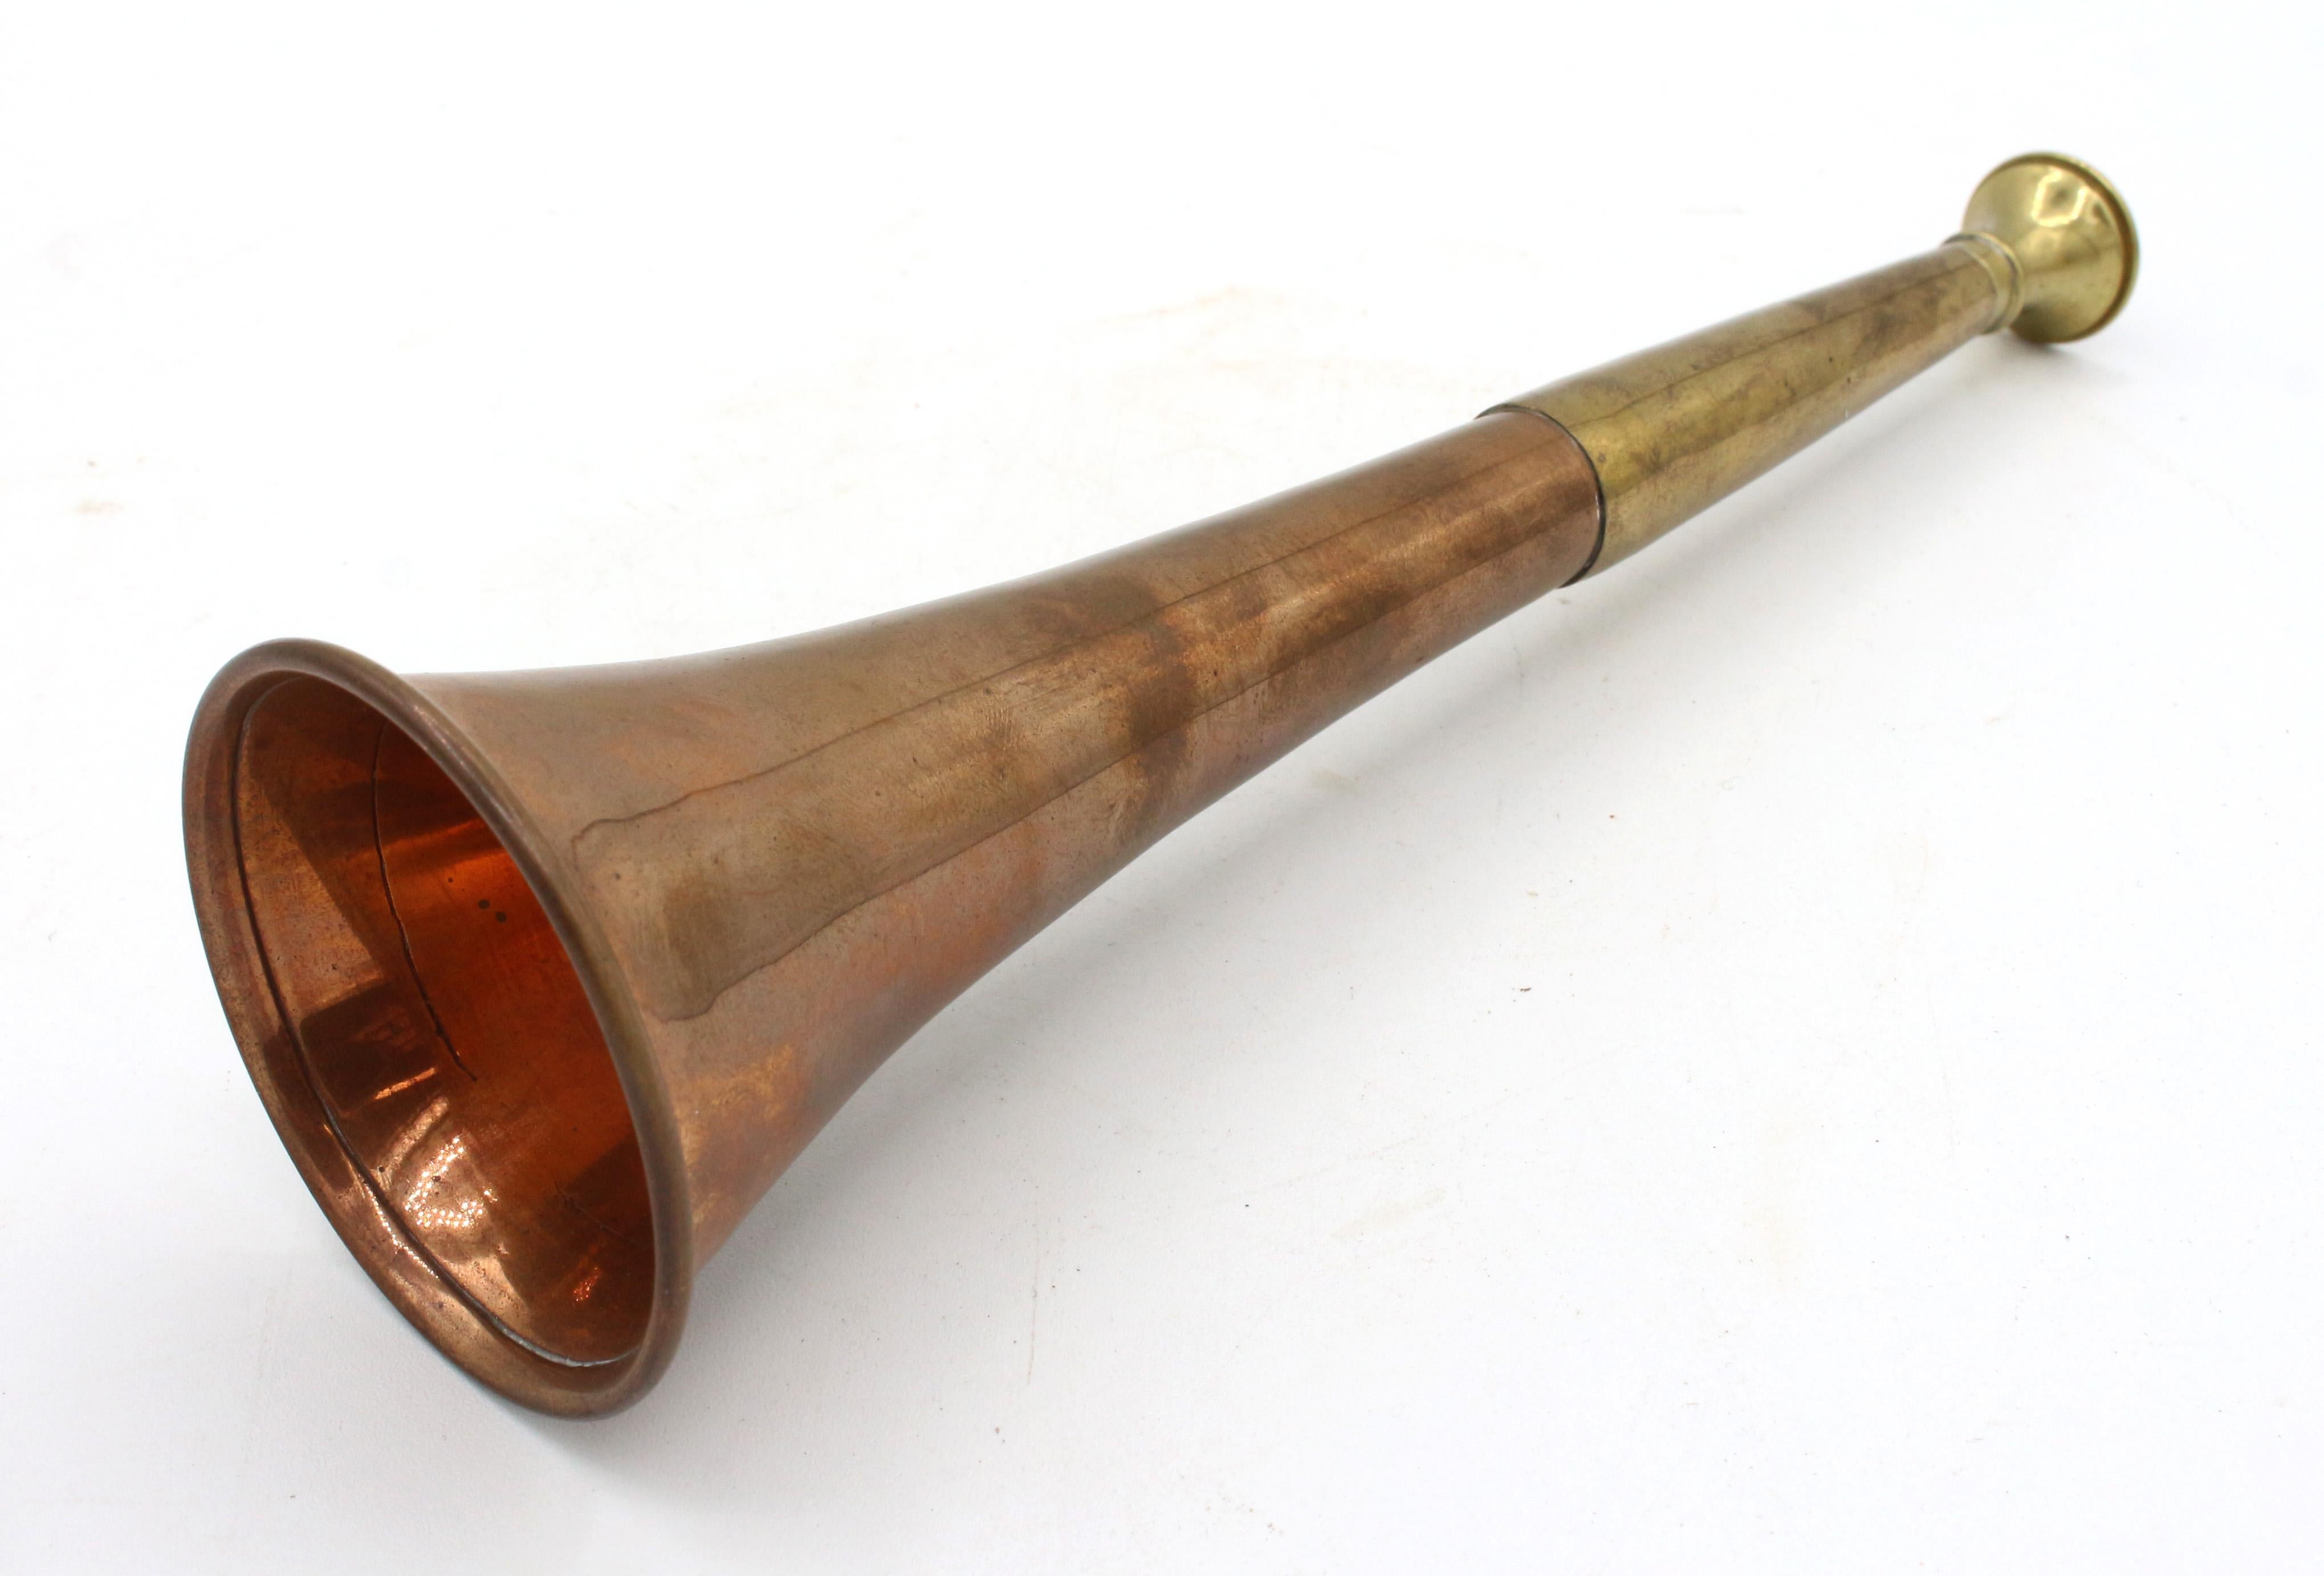 Antique, circa 1900, English fox hunting horn of copper & brass. Nicely patinated with age.
8.75